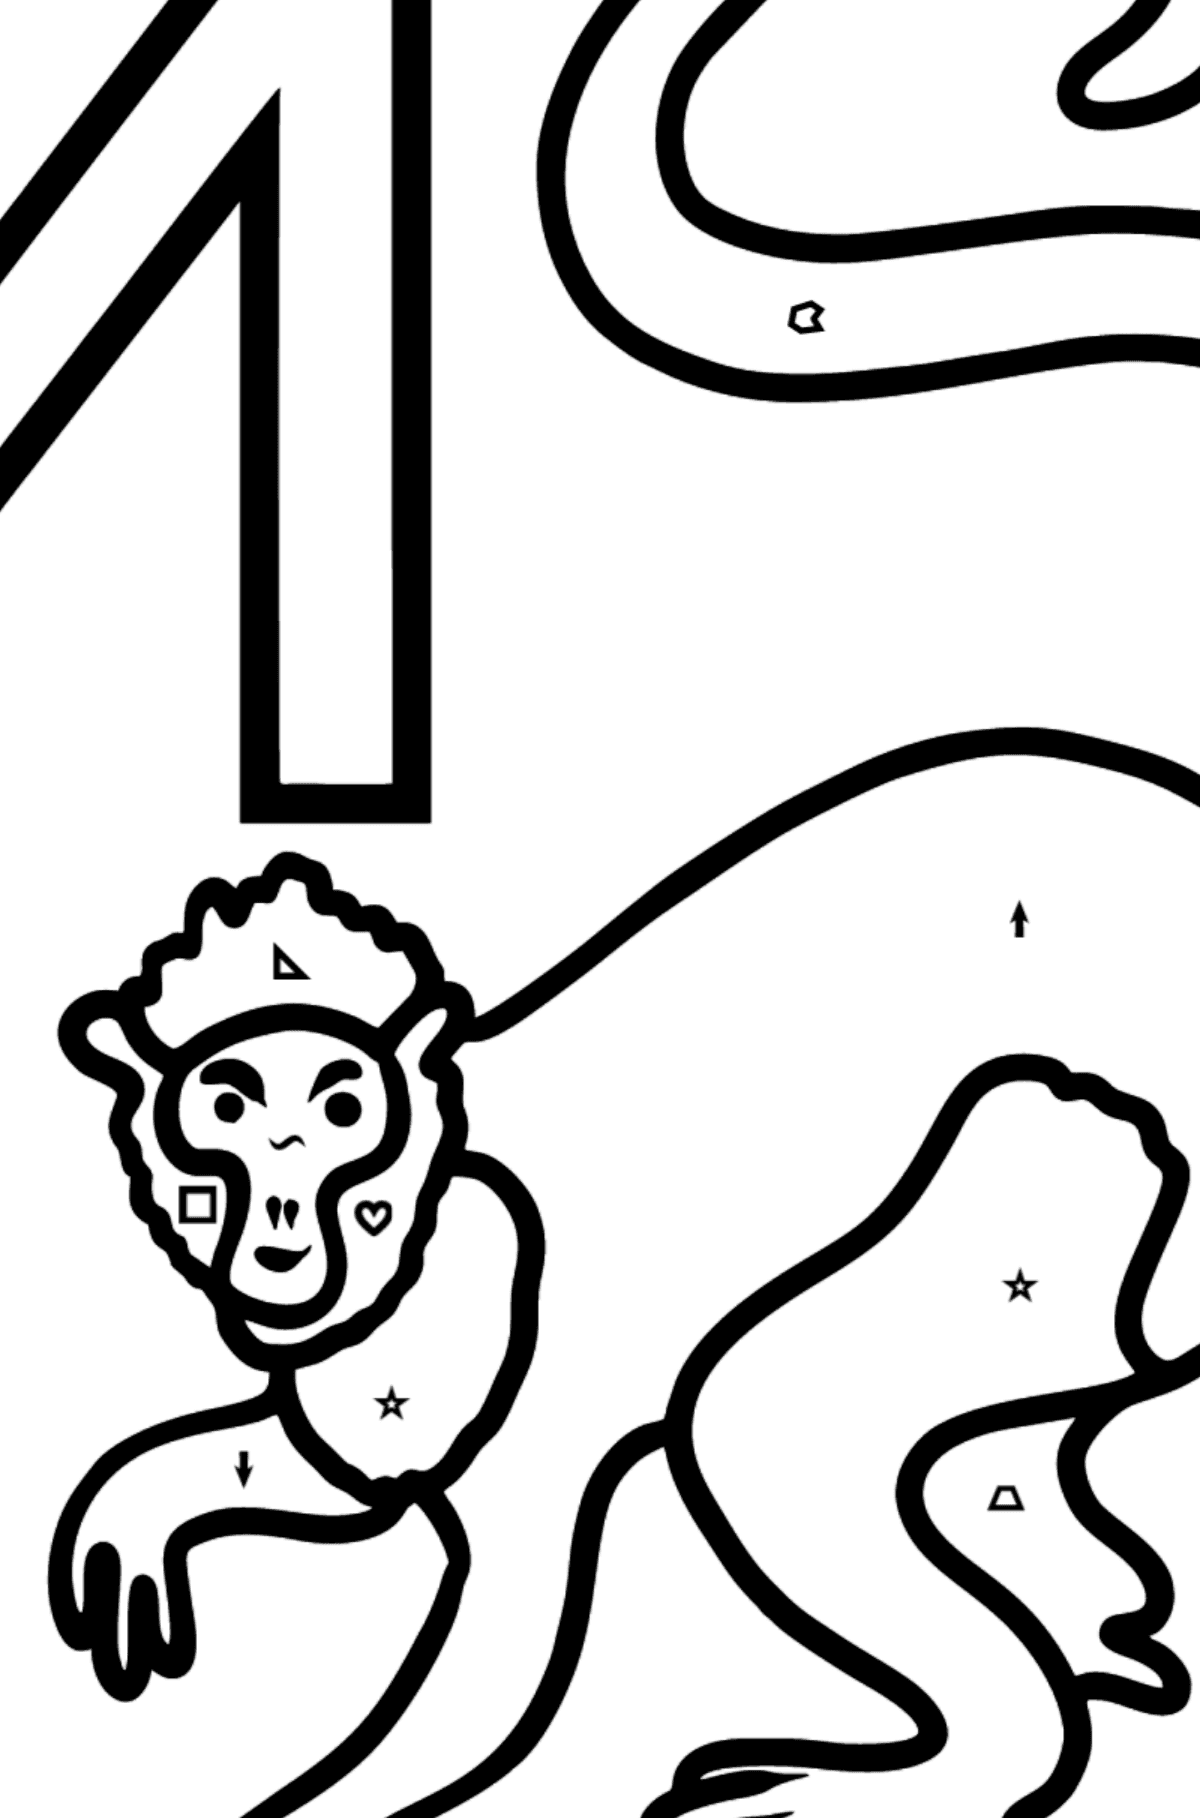 Portuguese Letter M coloring pages - MACACO - Coloring by Symbols and Geometric Shapes for Kids